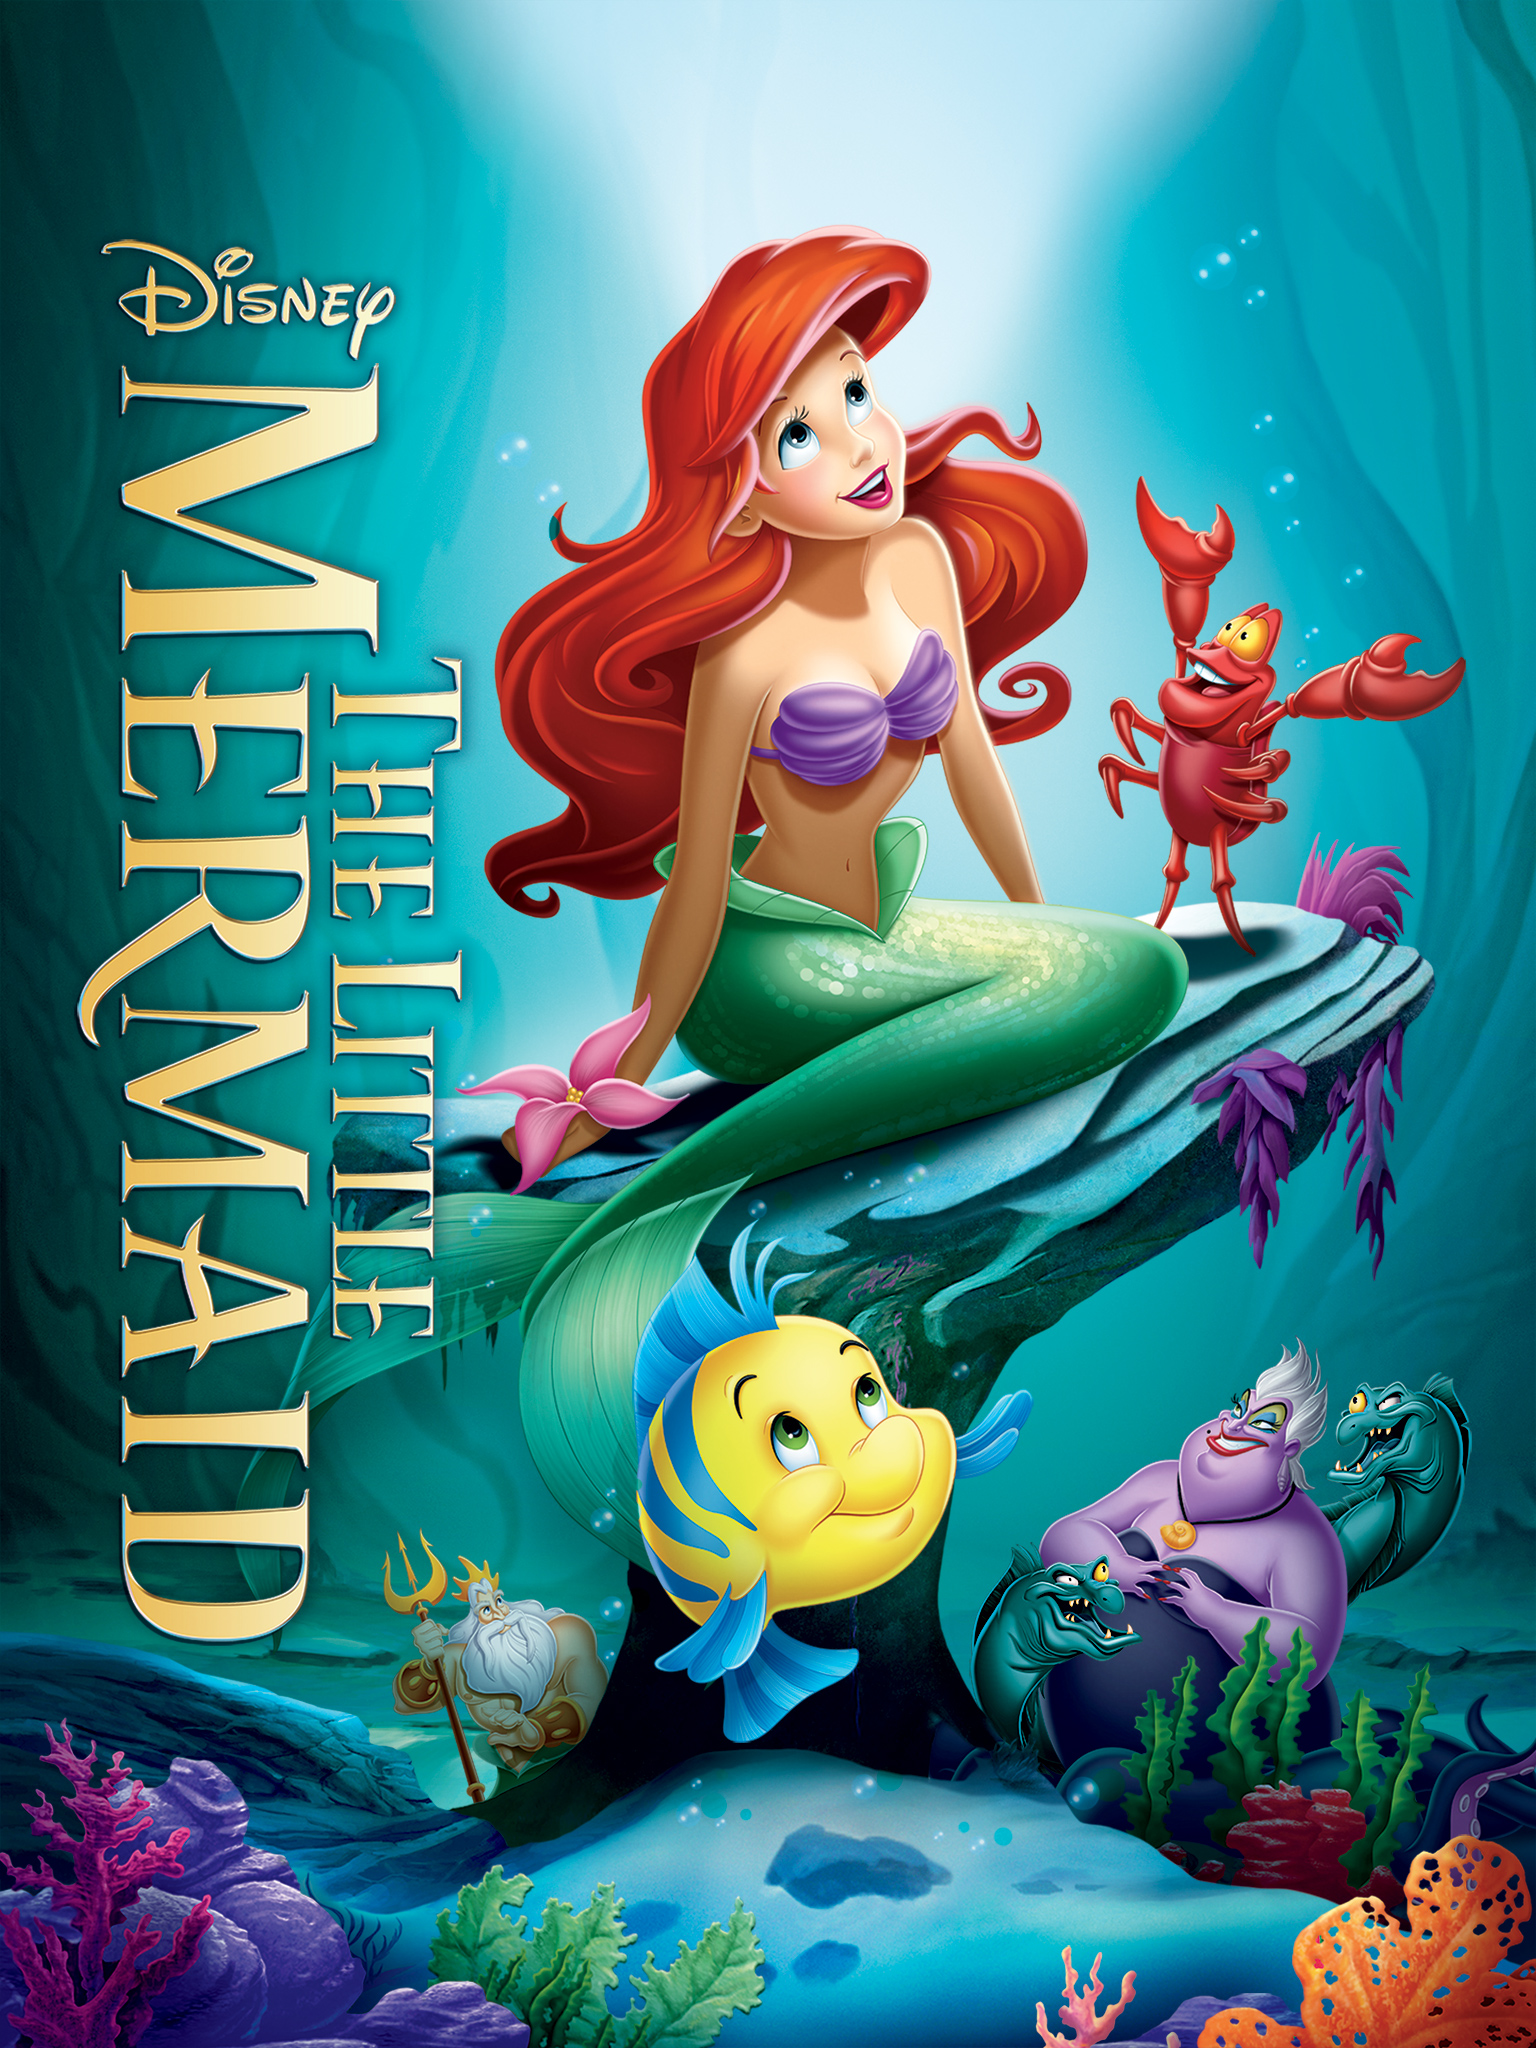 movie reviews for the little mermaid